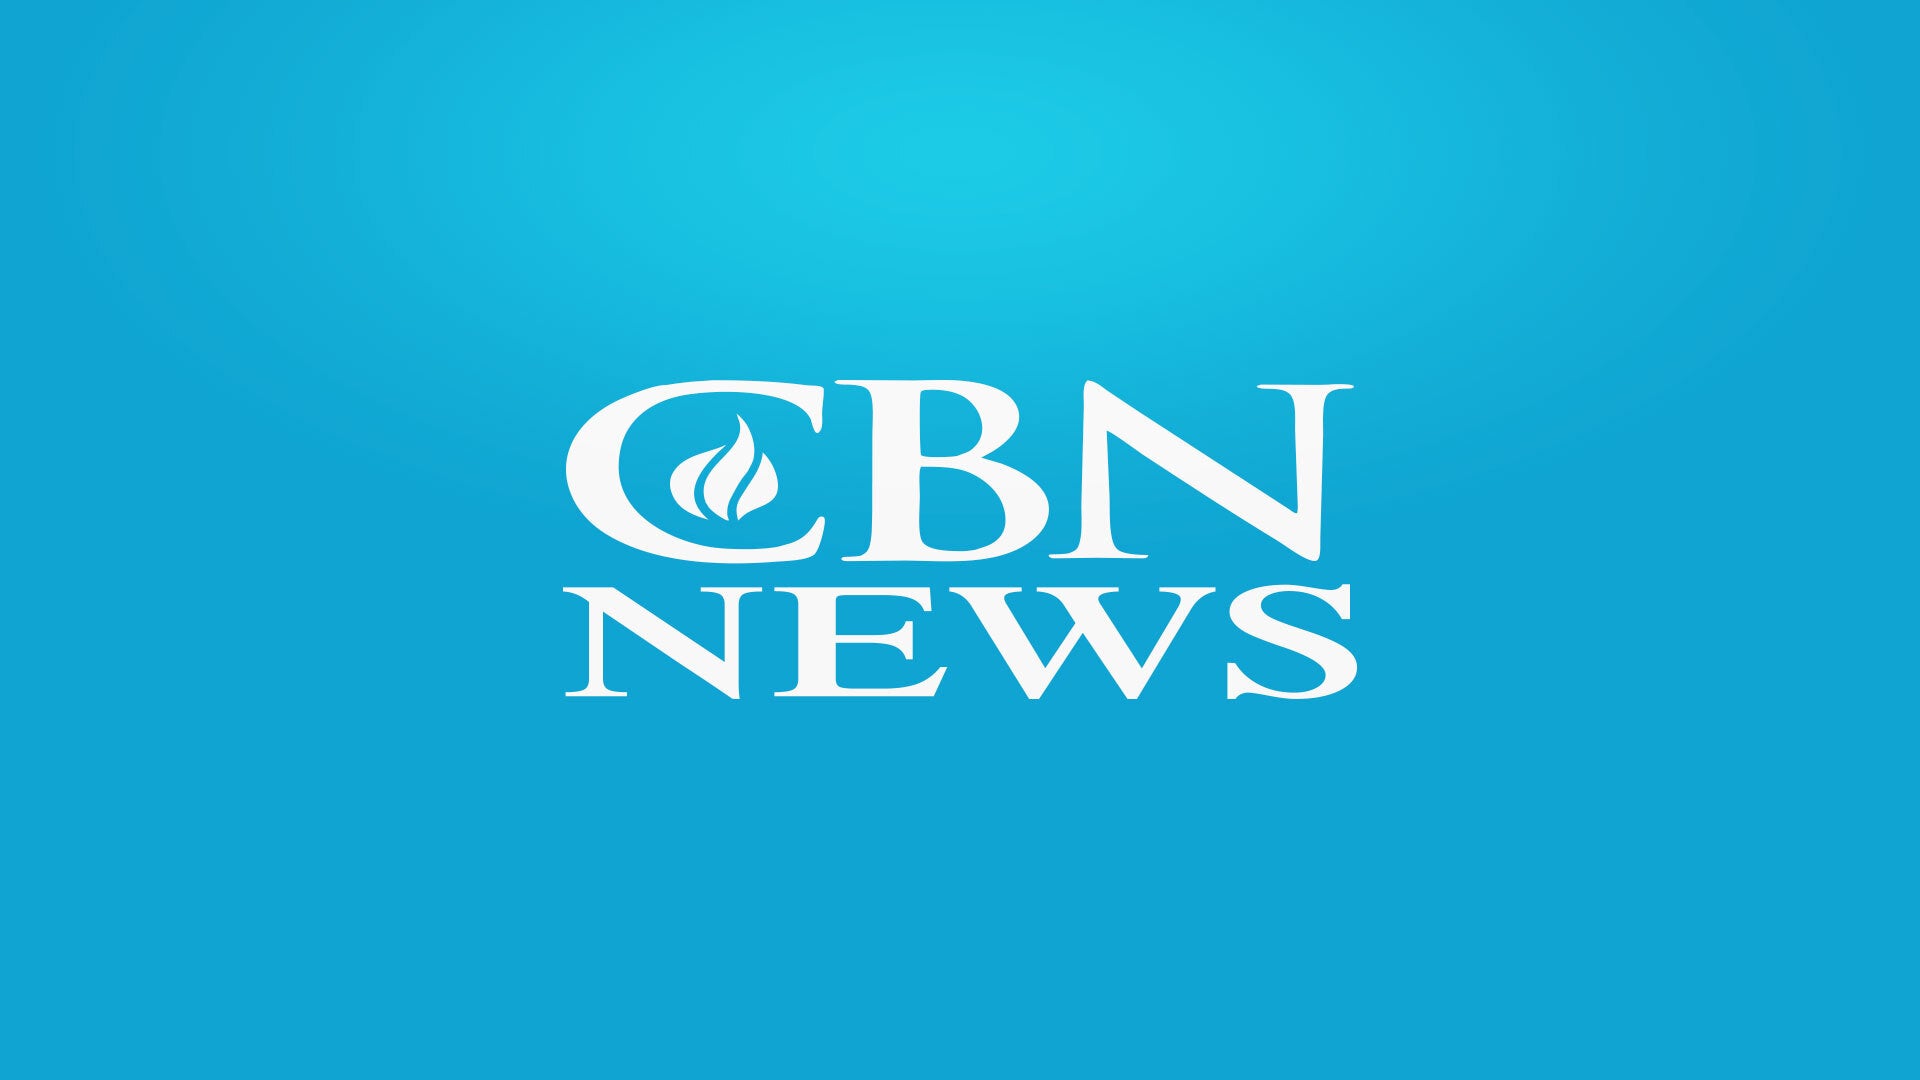 News on The 700 Club: June 9, 2022 | CBN